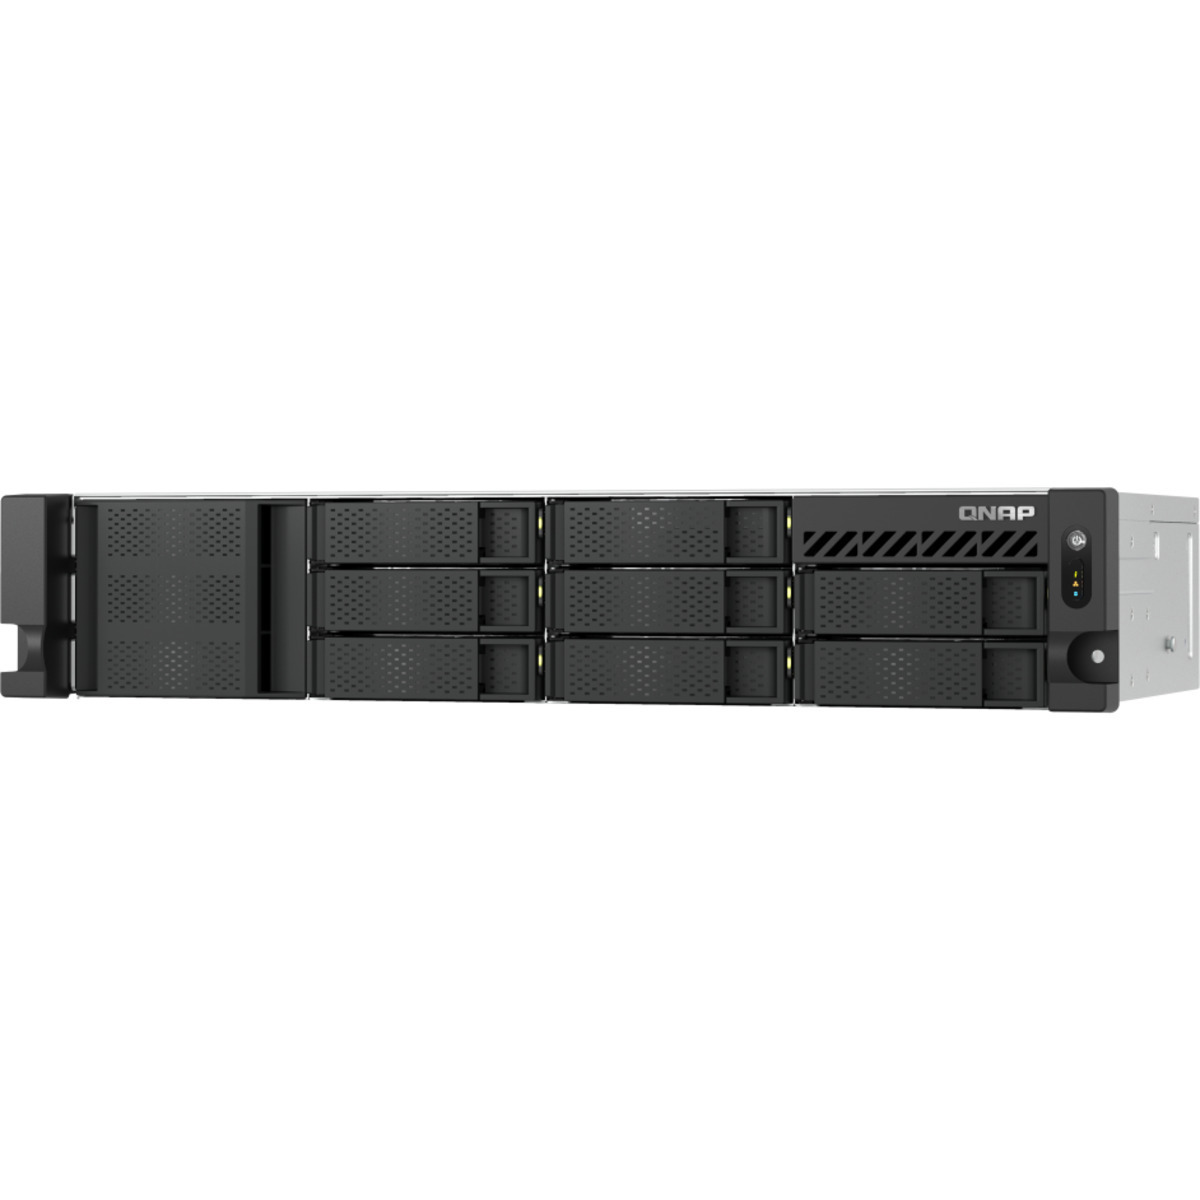 QNAP TS-855eU 4tb 8-Bay RackMount Multimedia / Power User / Business NAS - Network Attached Storage Device 8x500gb Crucial MX500 CT500MX500SSD1 2.5 560/510MB/s SATA 6Gb/s SSD CONSUMER Class Drives Installed - Burn-In Tested - FREE RAM UPGRADE TS-855eU